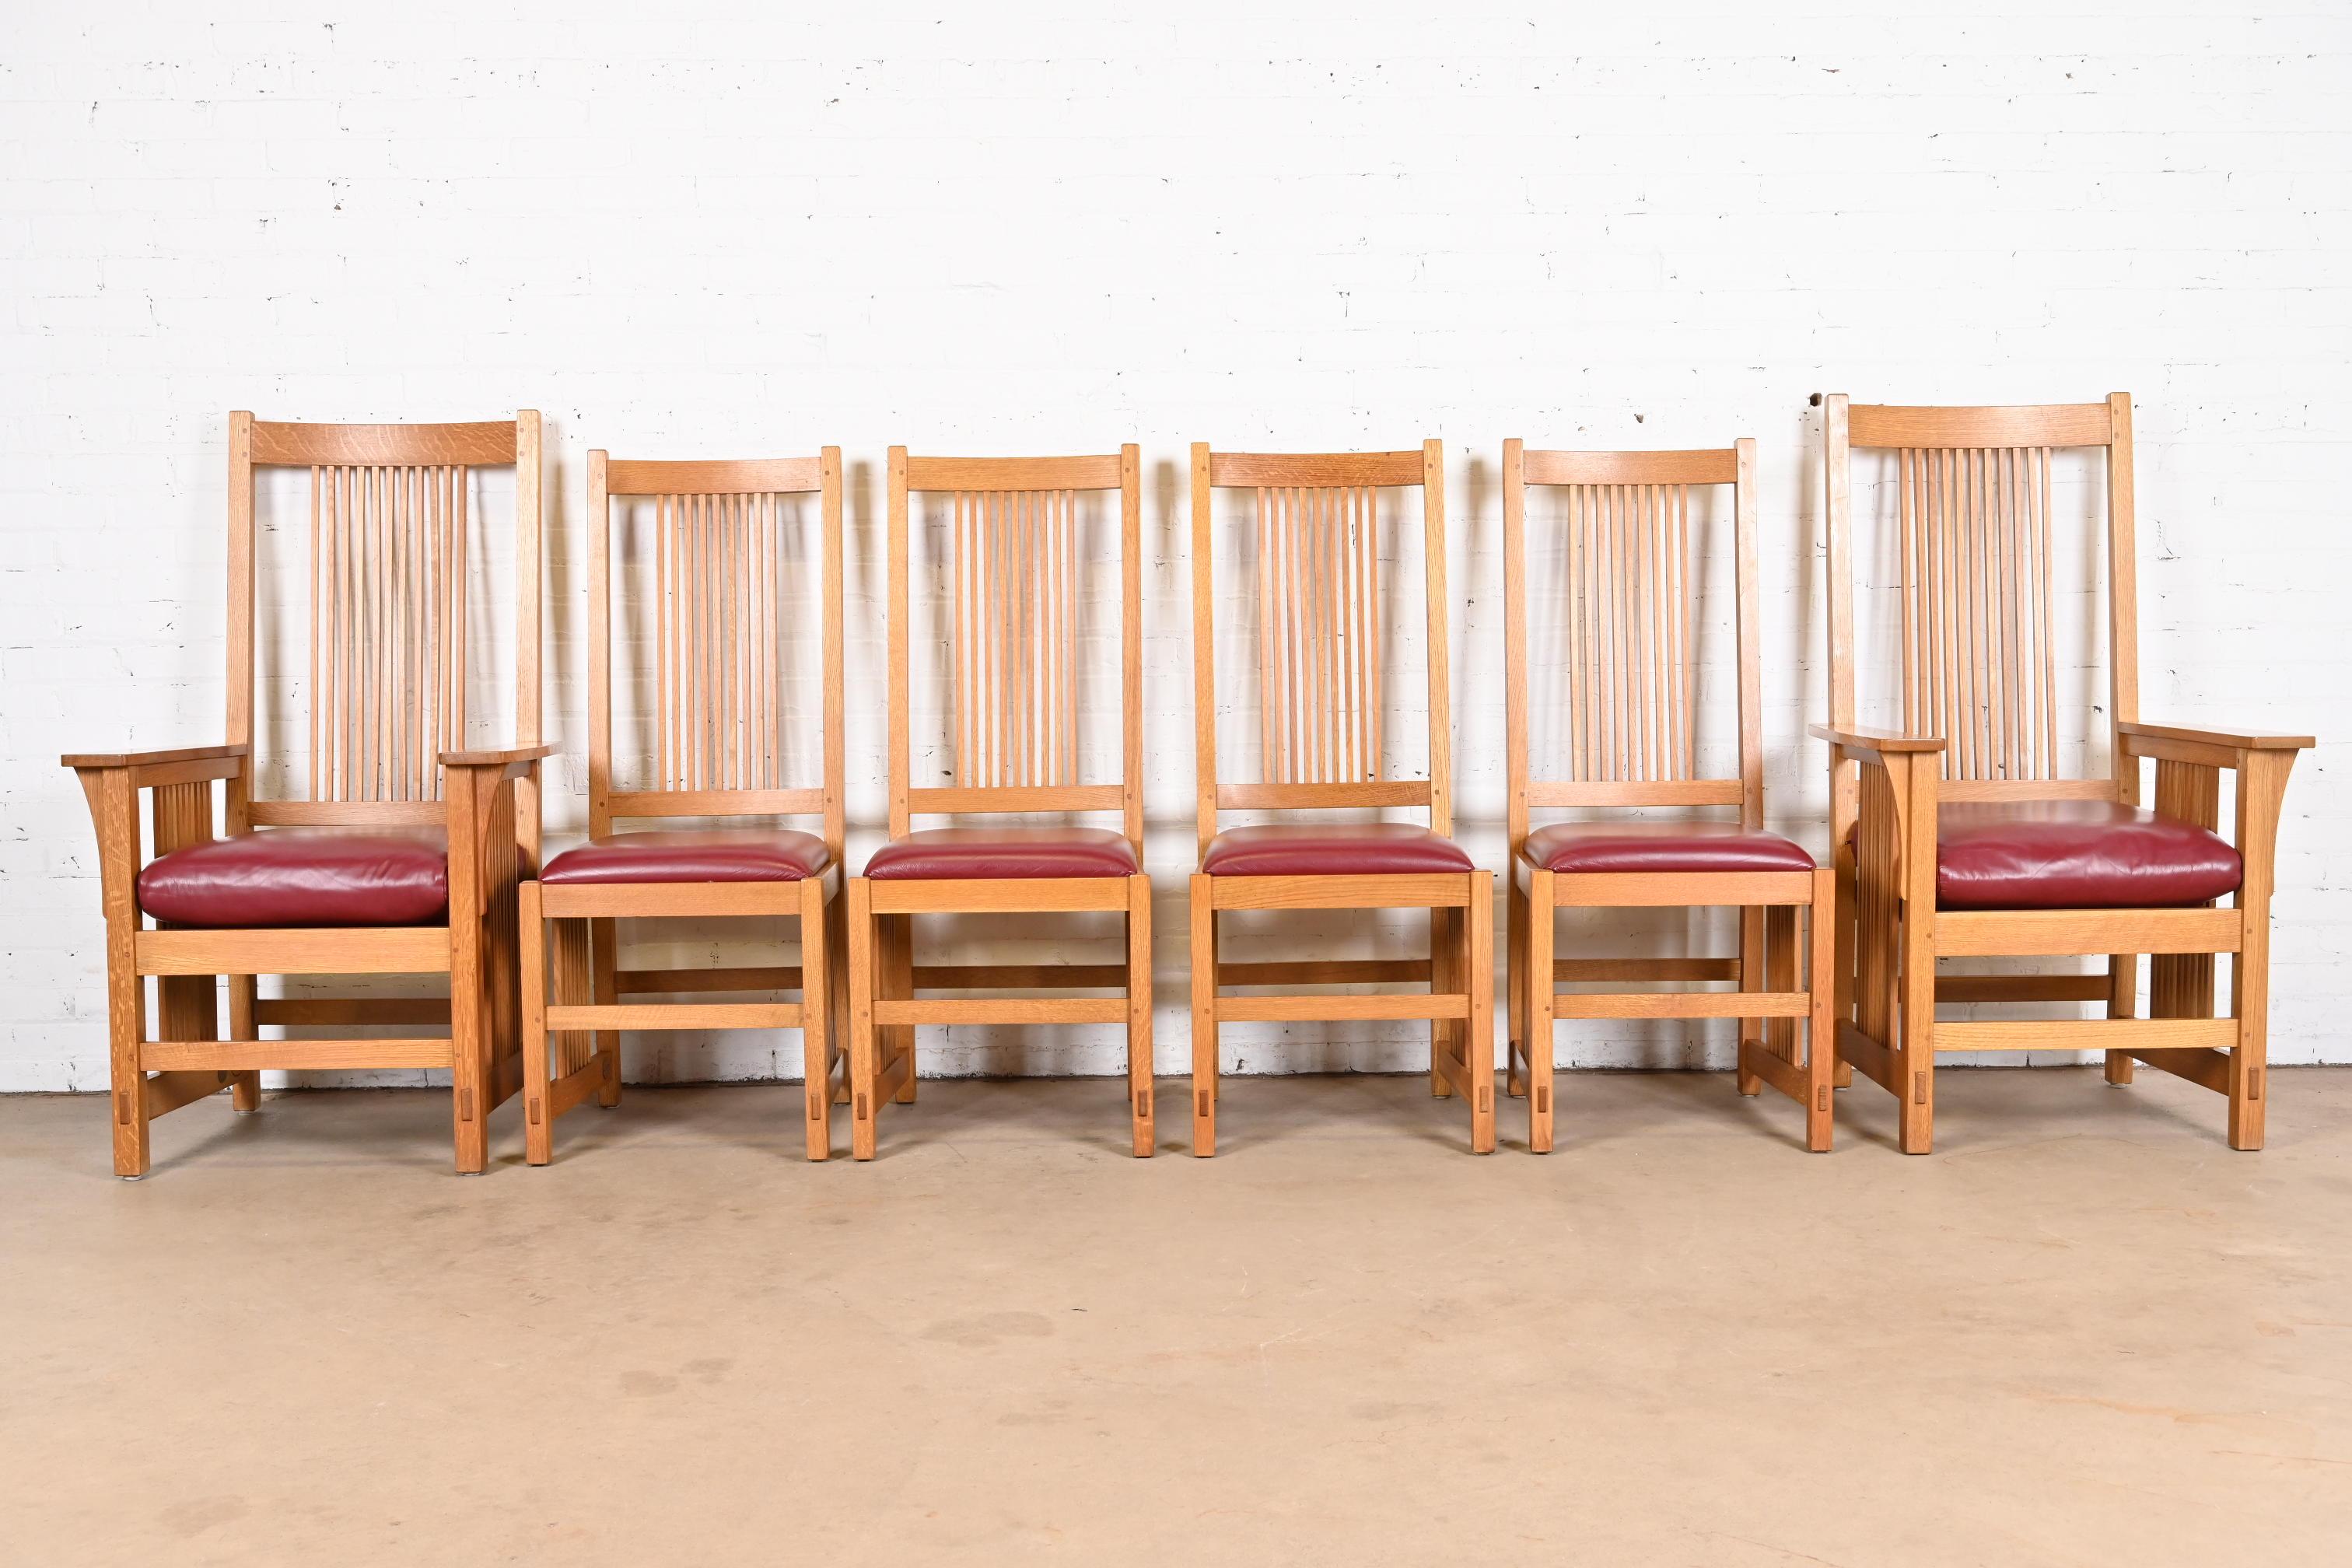 An exceptional set of six Mission or Arts & Crafts style dining chairs

By L. & J.G. Stickley

USA, Late 20th Century

Solid quarter sawn oak frames, with burgundy leather upholstered seats.

Measures:
Side chairs - 19